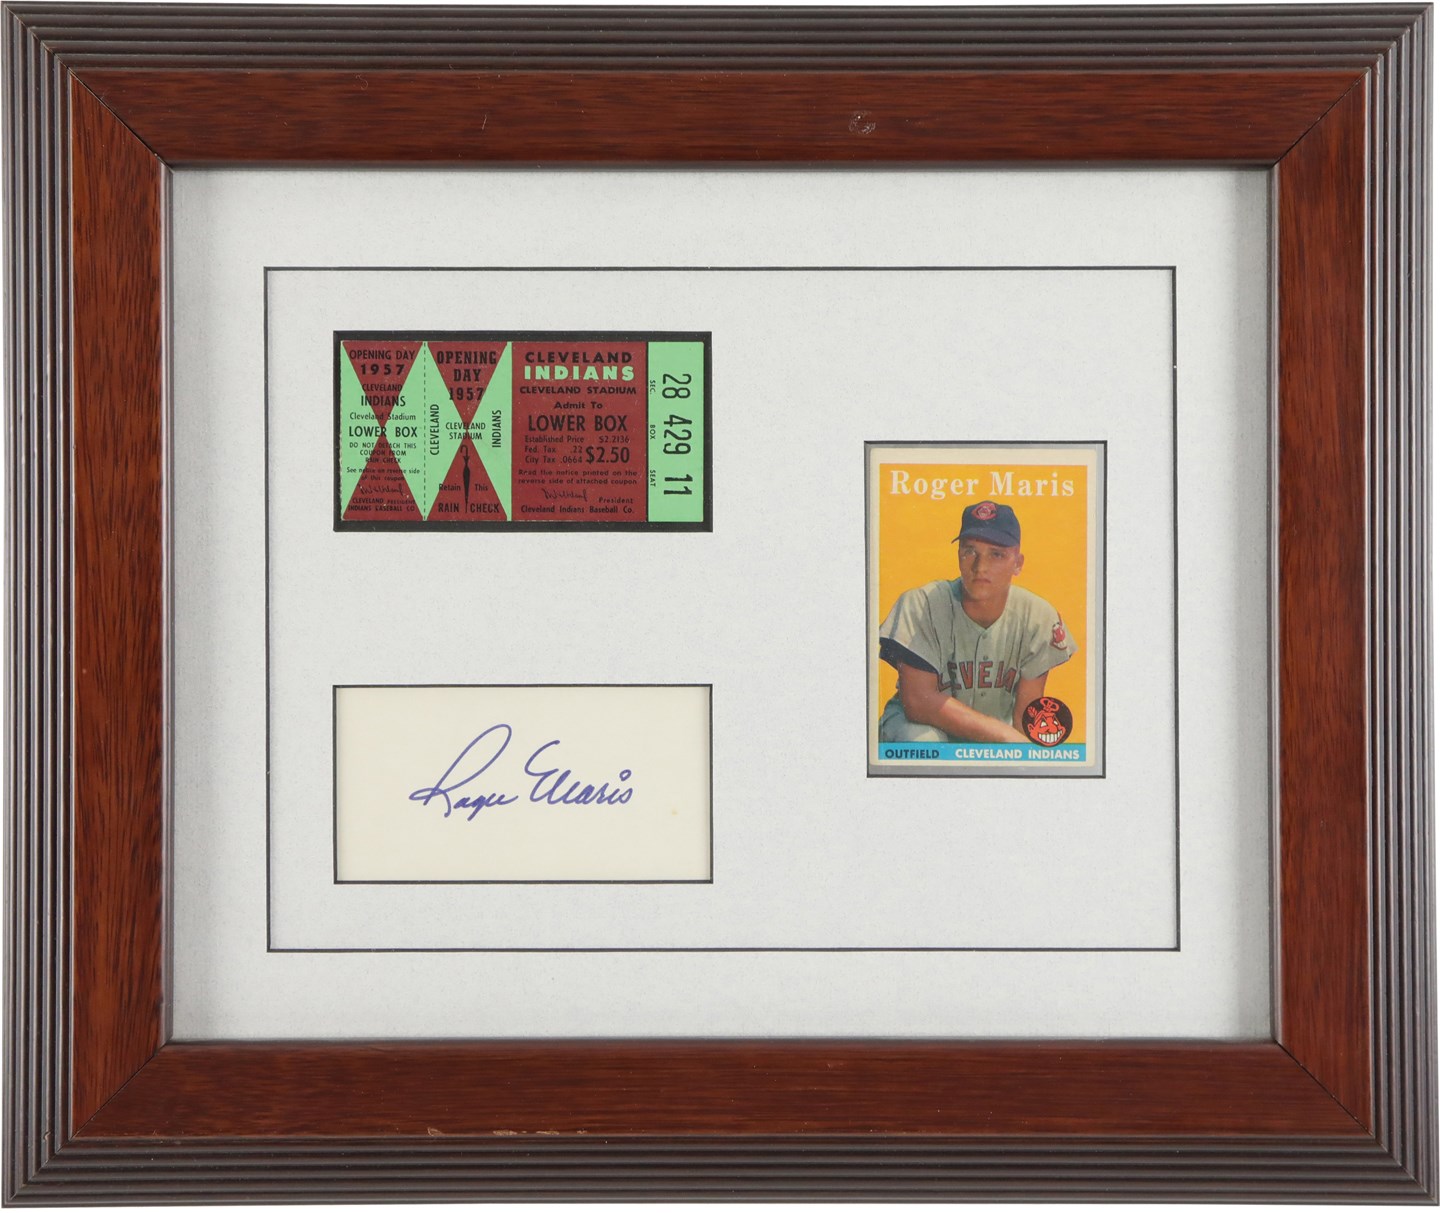 - Roger Maris MLB Debut Ticket Stub with 1958 Topps Rookie Card and Autograph Display